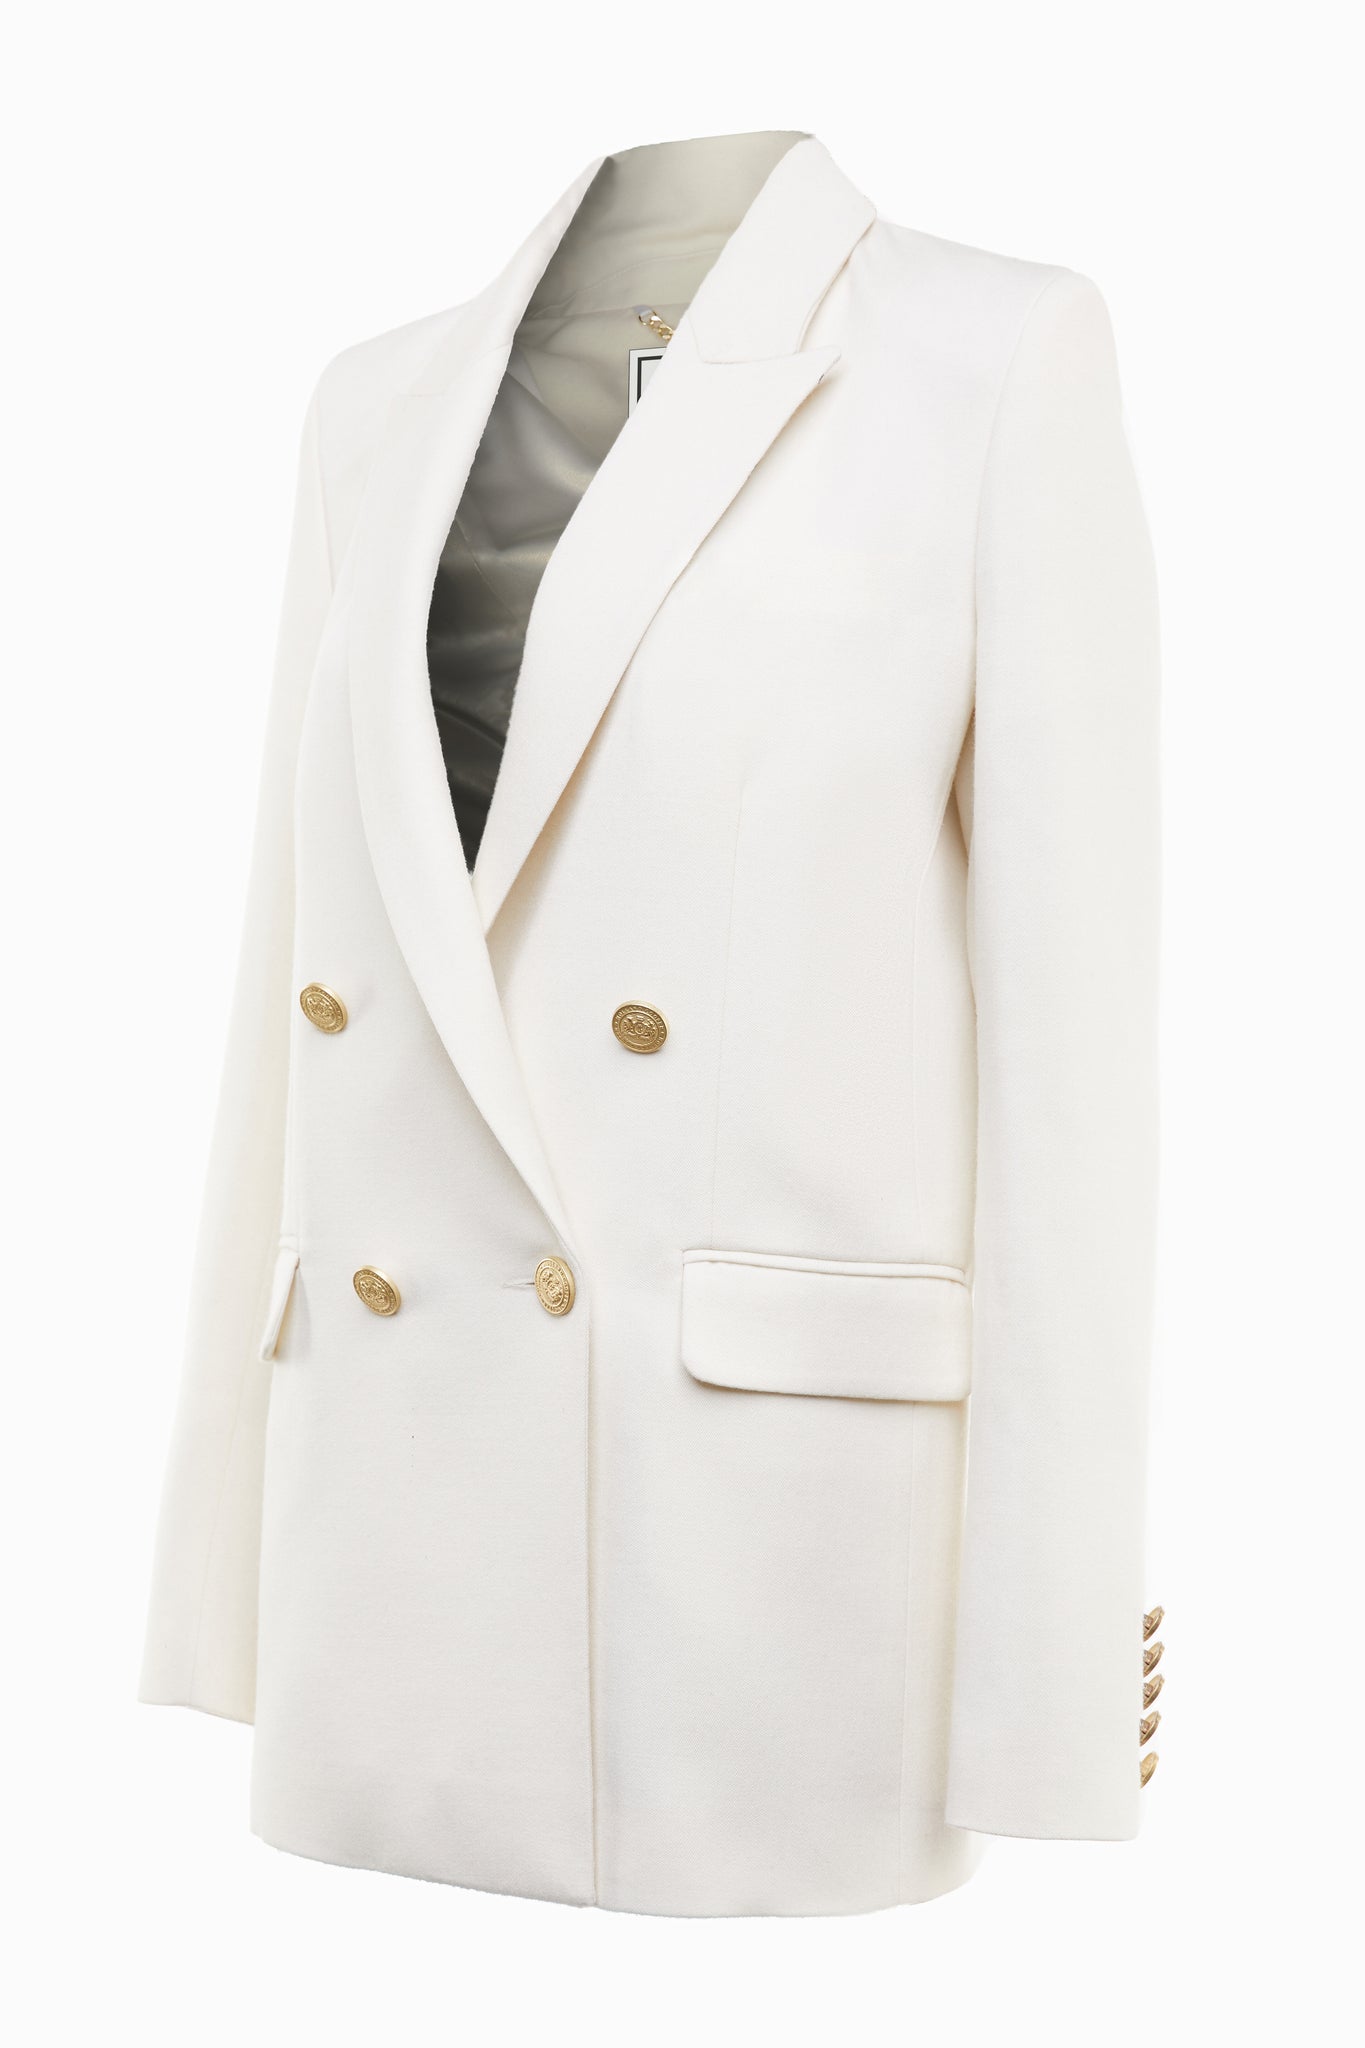 longline double breasted wool blazer in ivory tailor made in britain with relaxed fit welt pockets and gold buttons on the front and cuffs